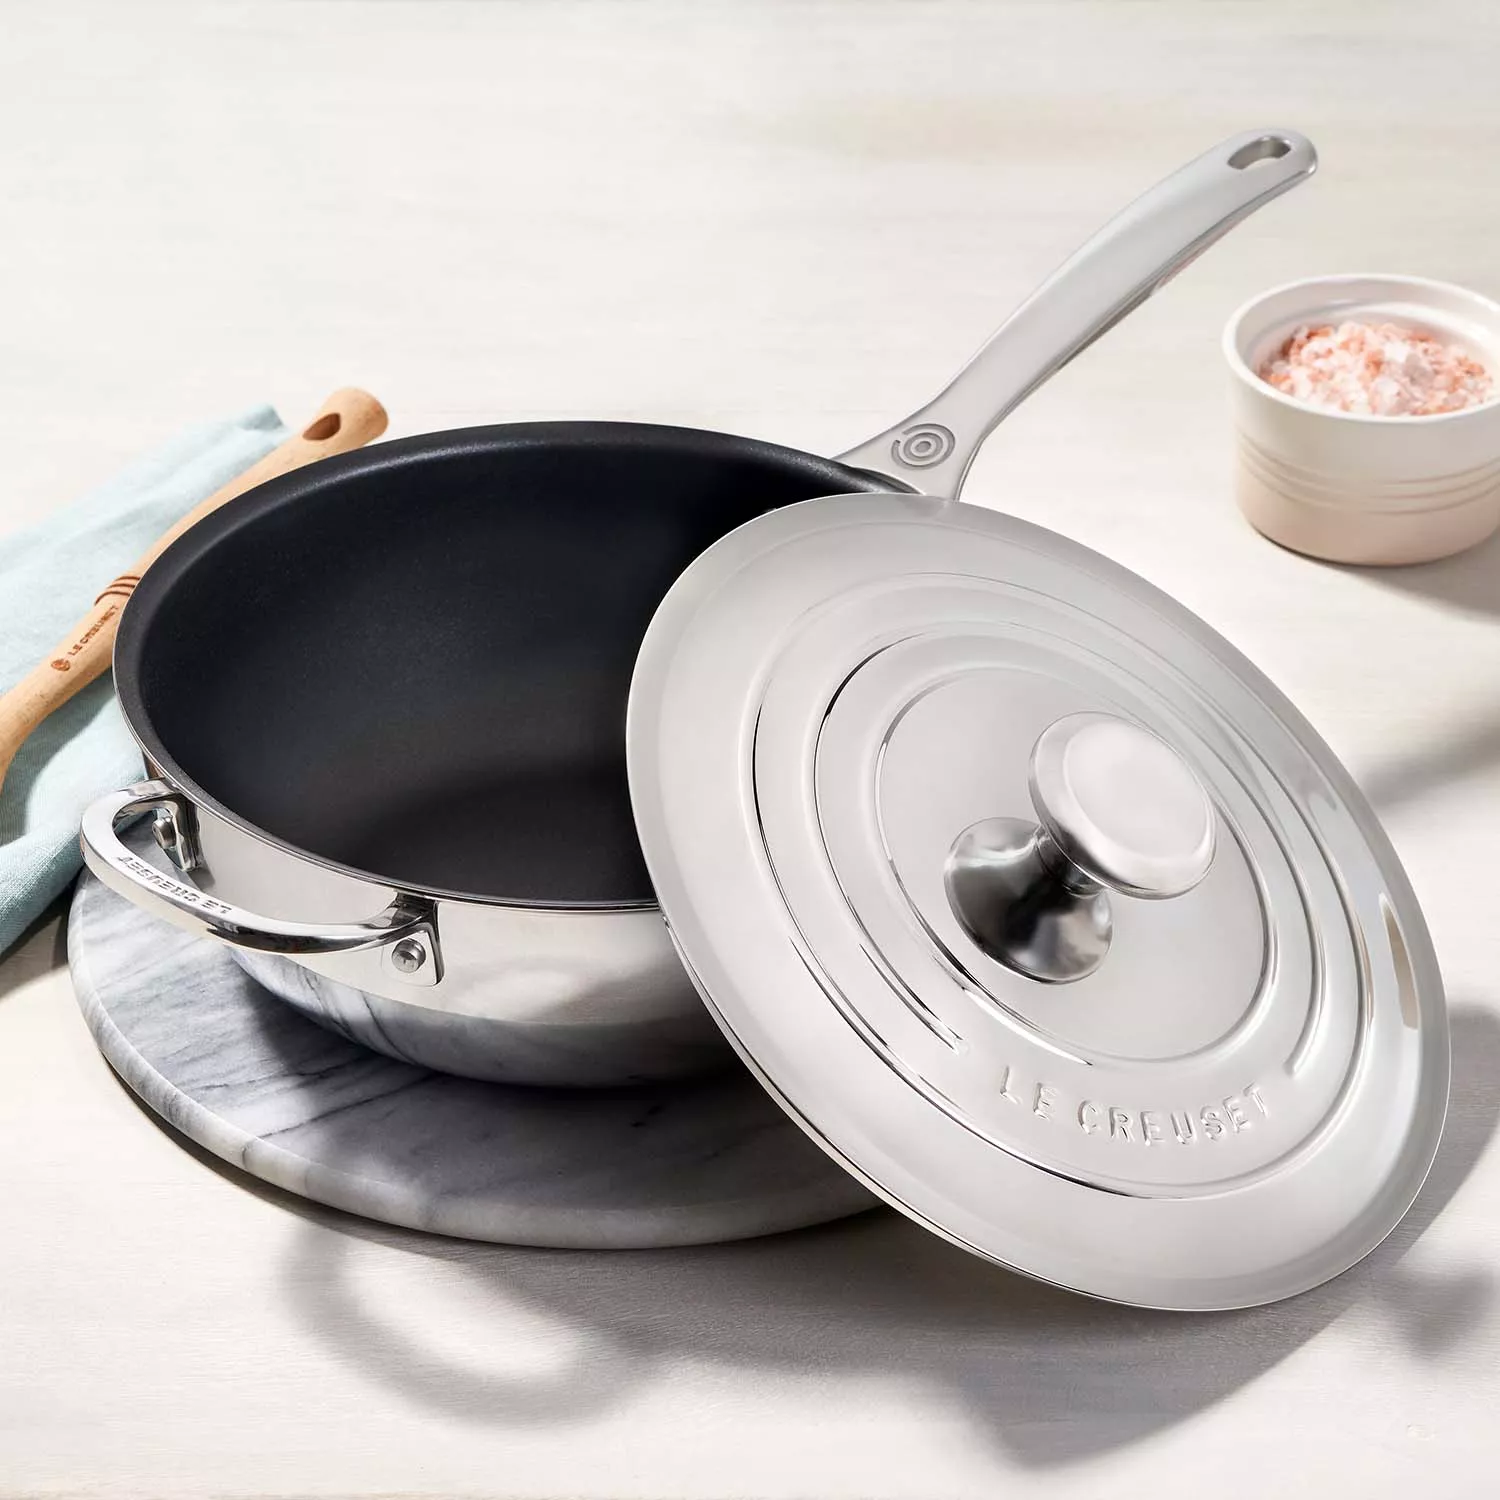 Le Creuset Stainless Steel Nonstick Saucepan with Lid, 3.5 Qt.